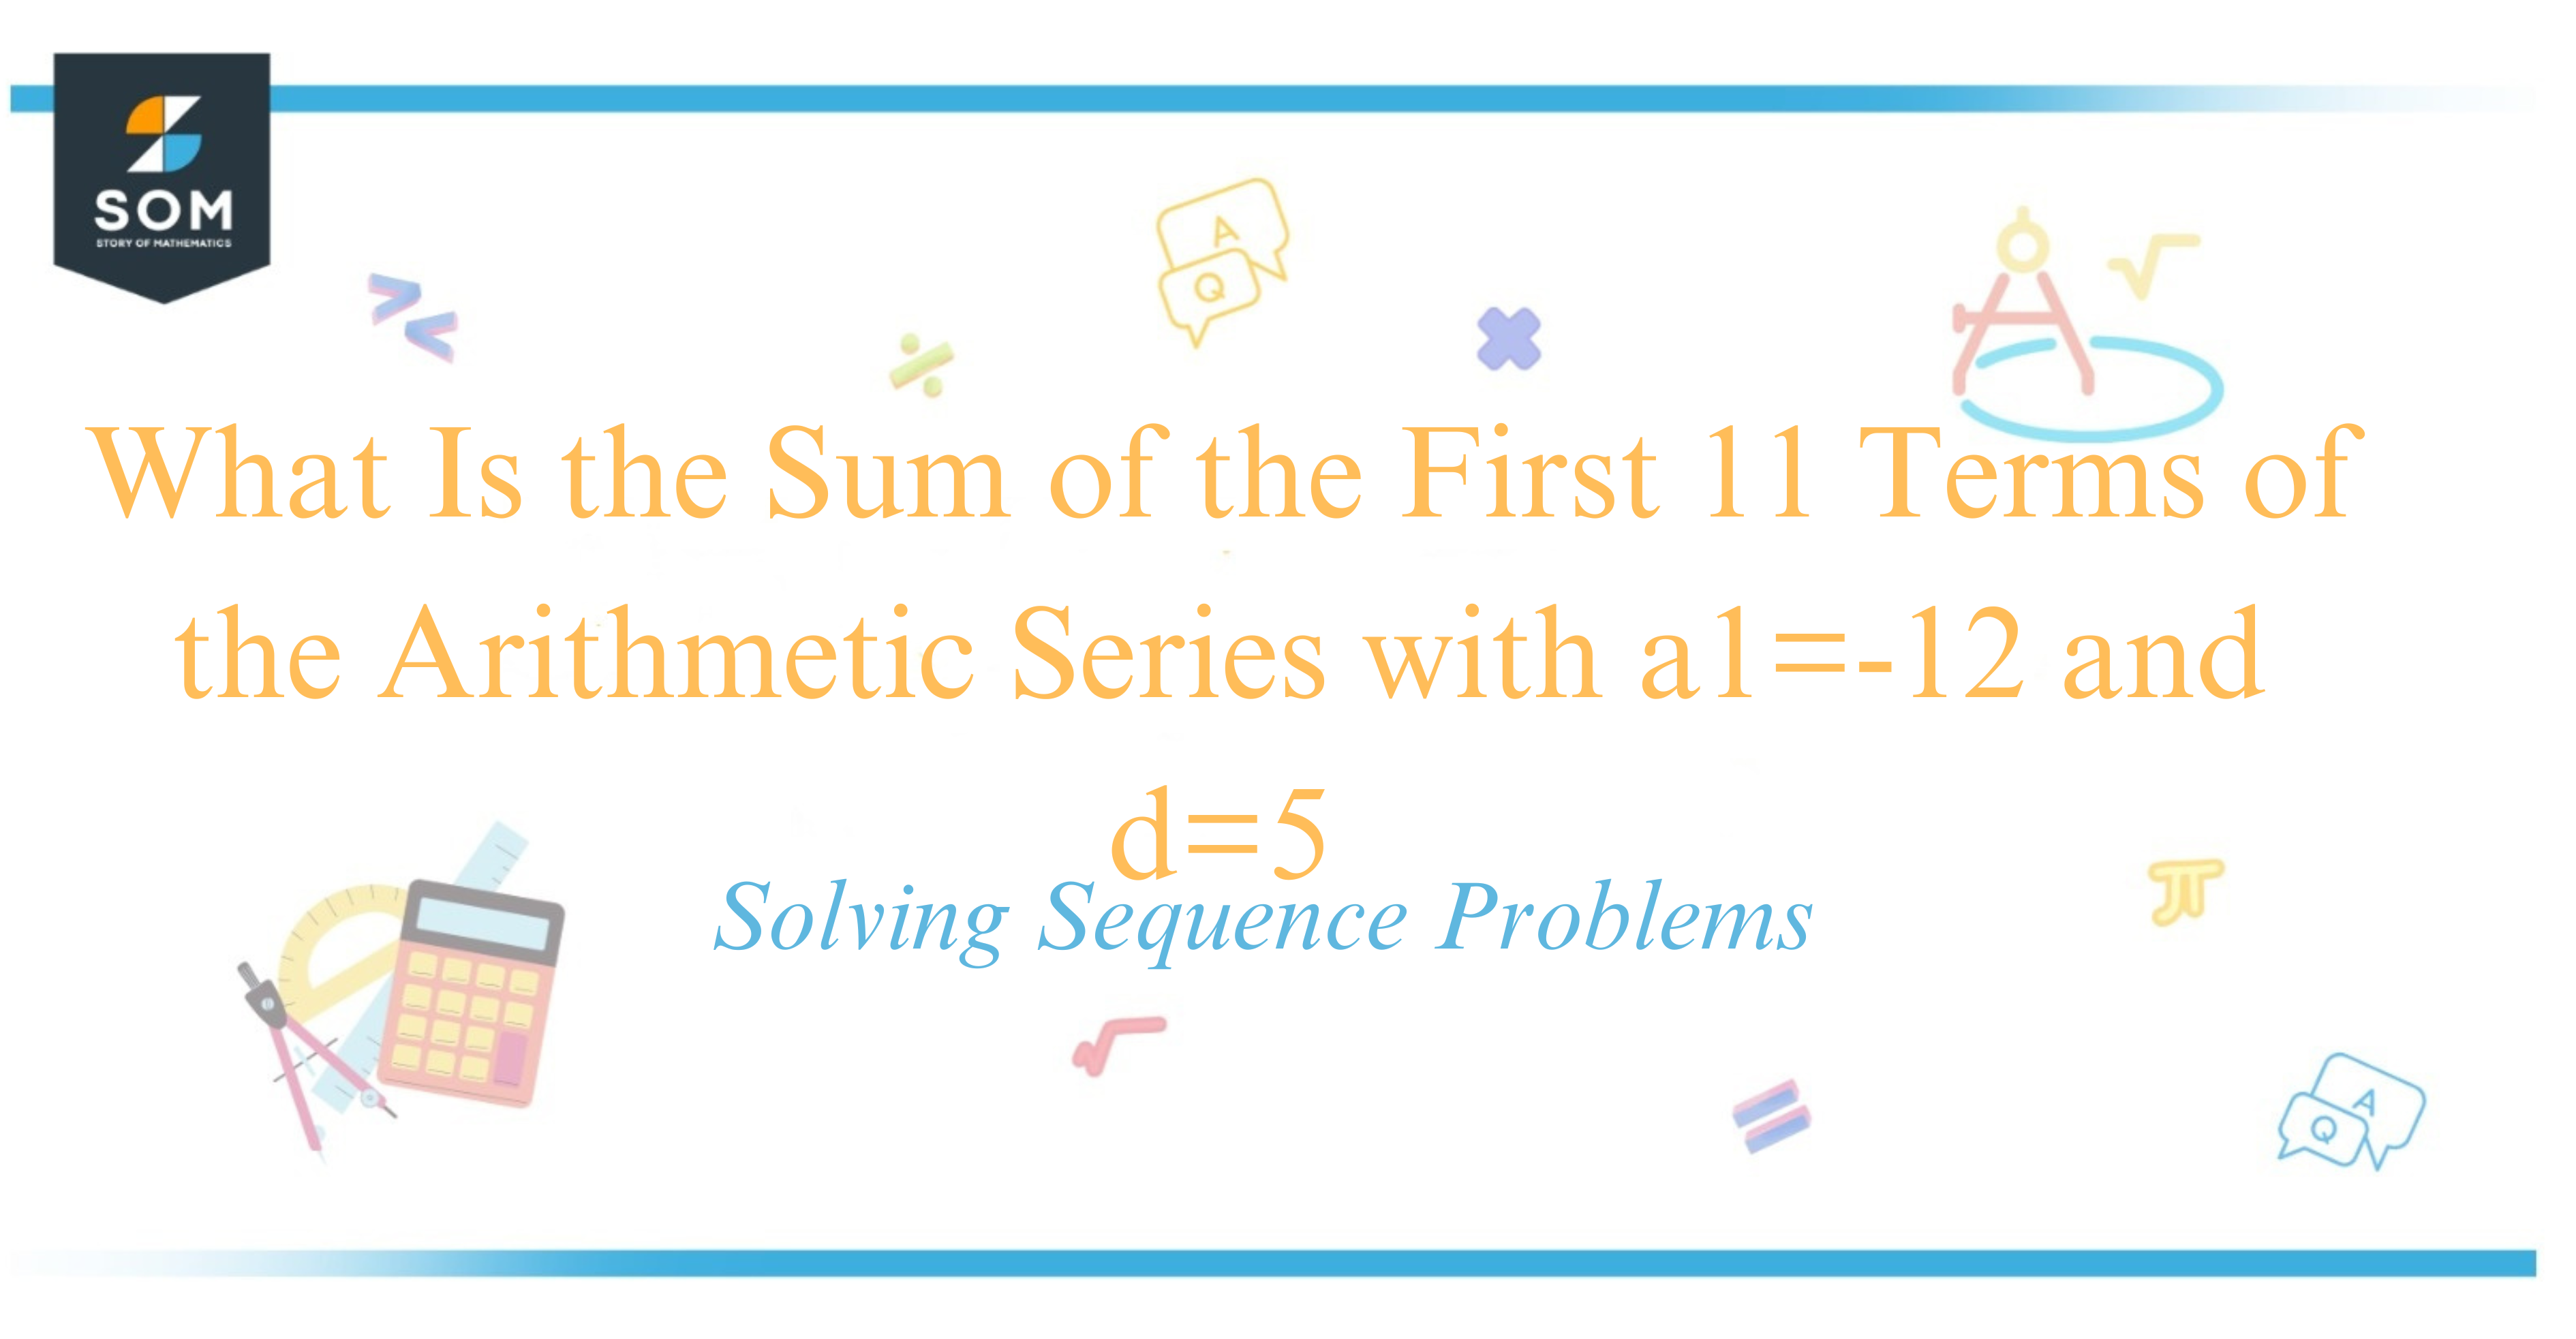 What Is the Sum of the First 11 Terms of the Arithmetic Series with a1=-12 and d=5 Solving Sequence Problems